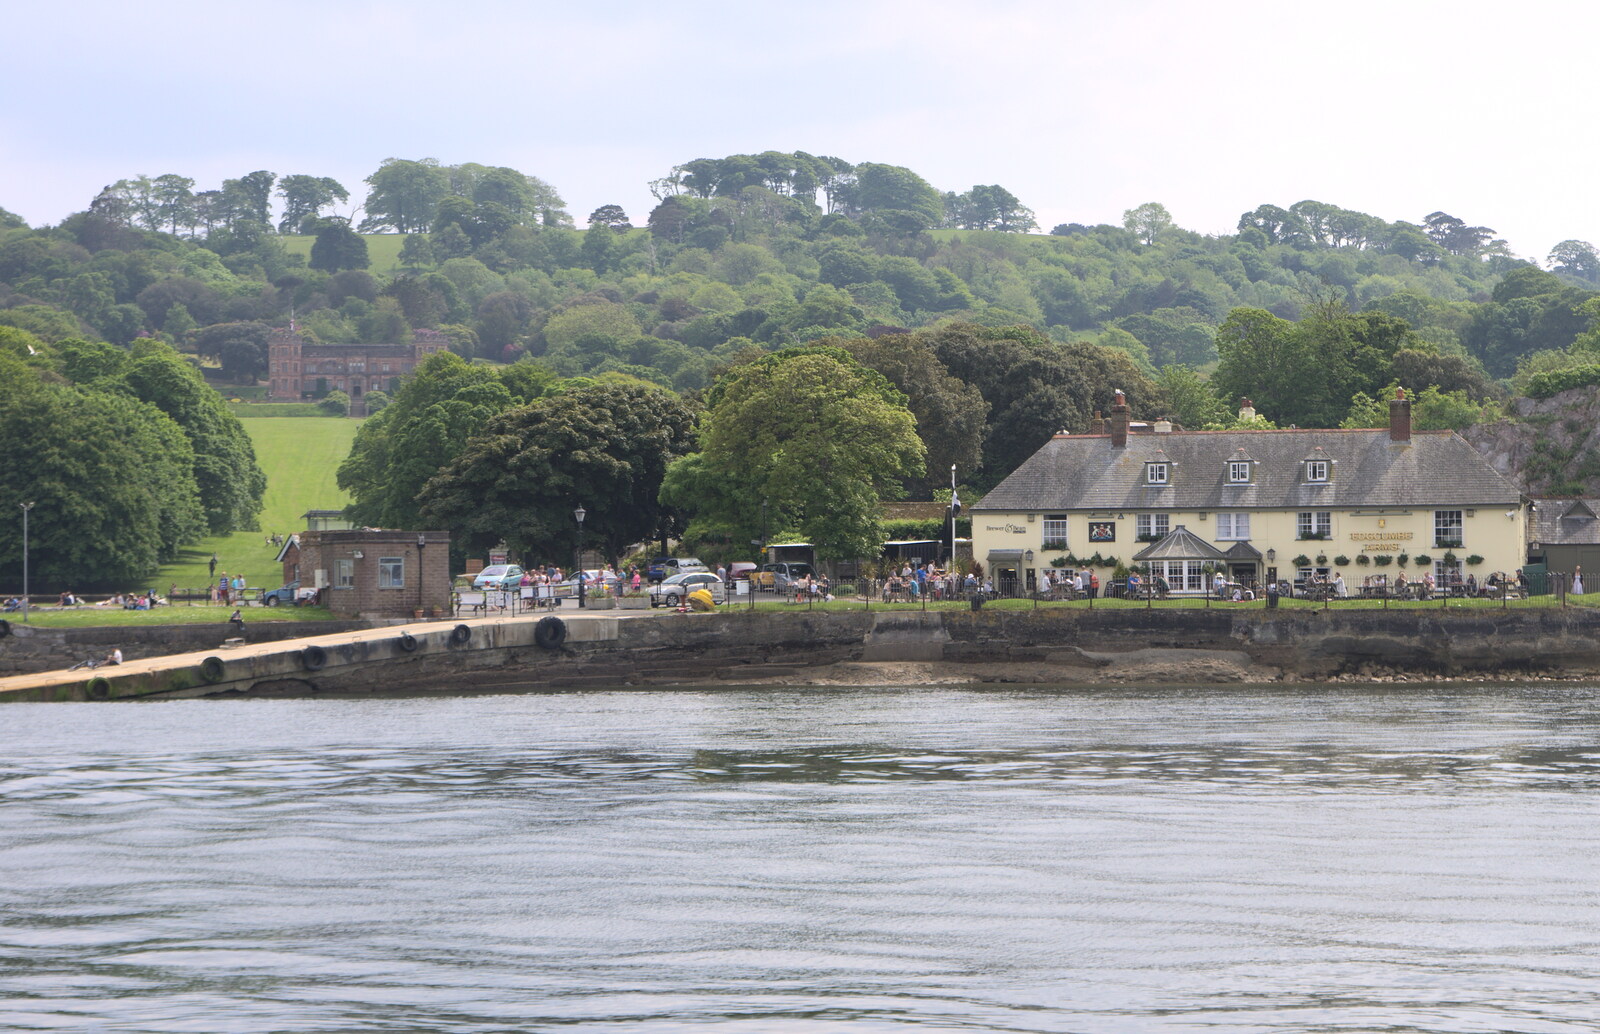 The Edgecumb Arms, over in Cornwall from A Tamar River Trip, Plymouth, Devon - 30th May 2016